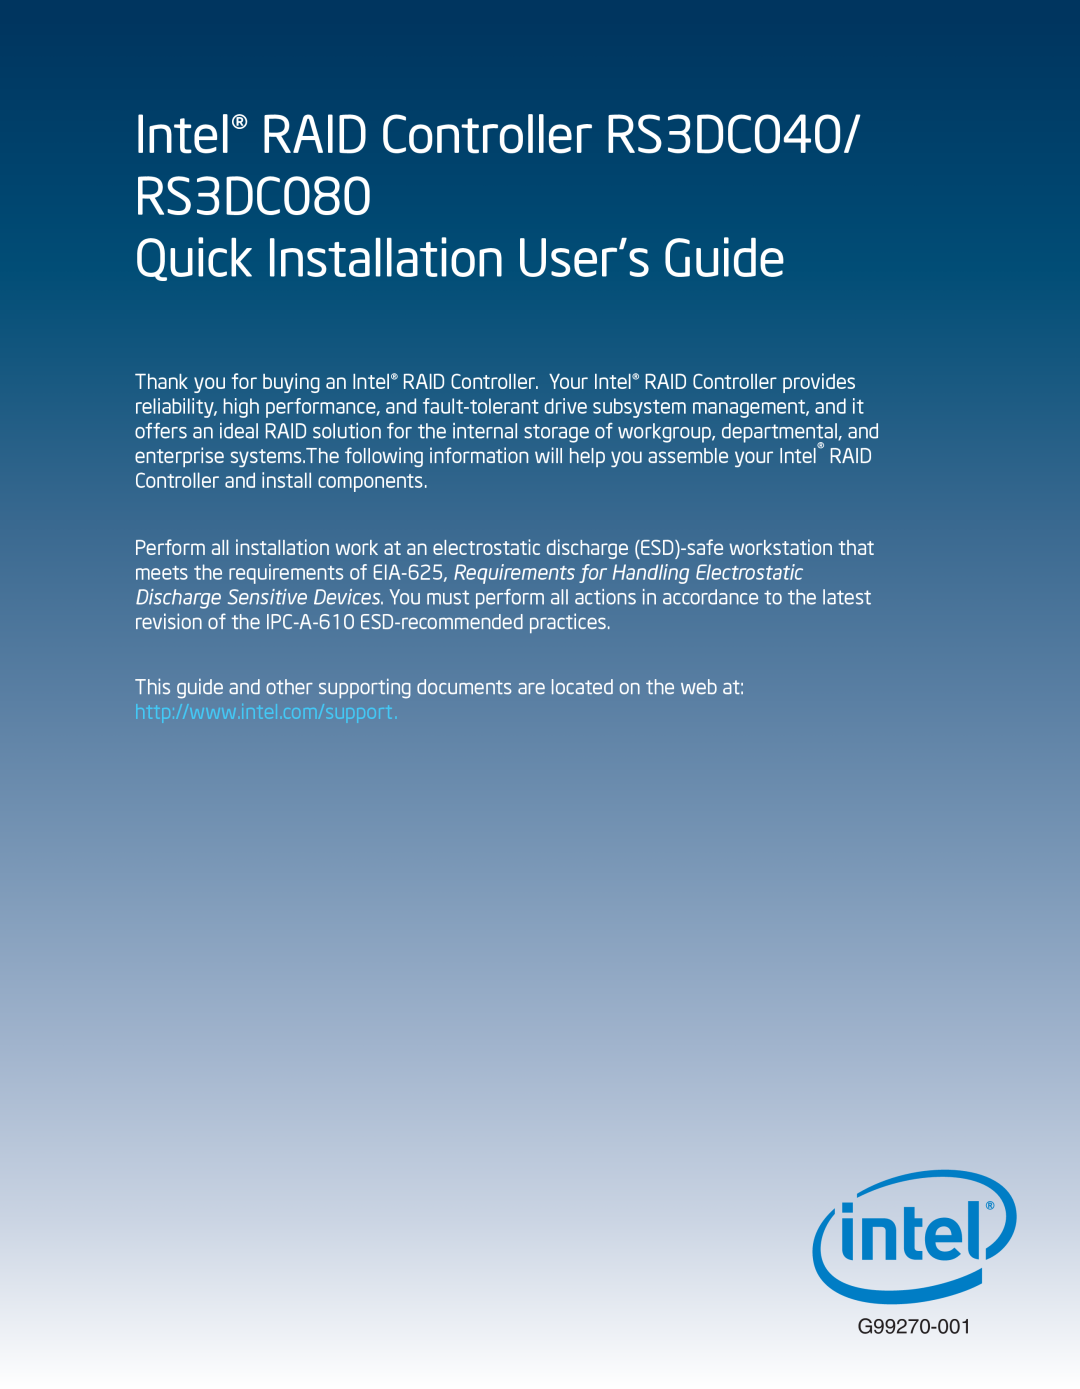 Intel manual G99270-001, Intel RAID Controller RS3DC040 RS3DC080, Quick Installation Users Guide 